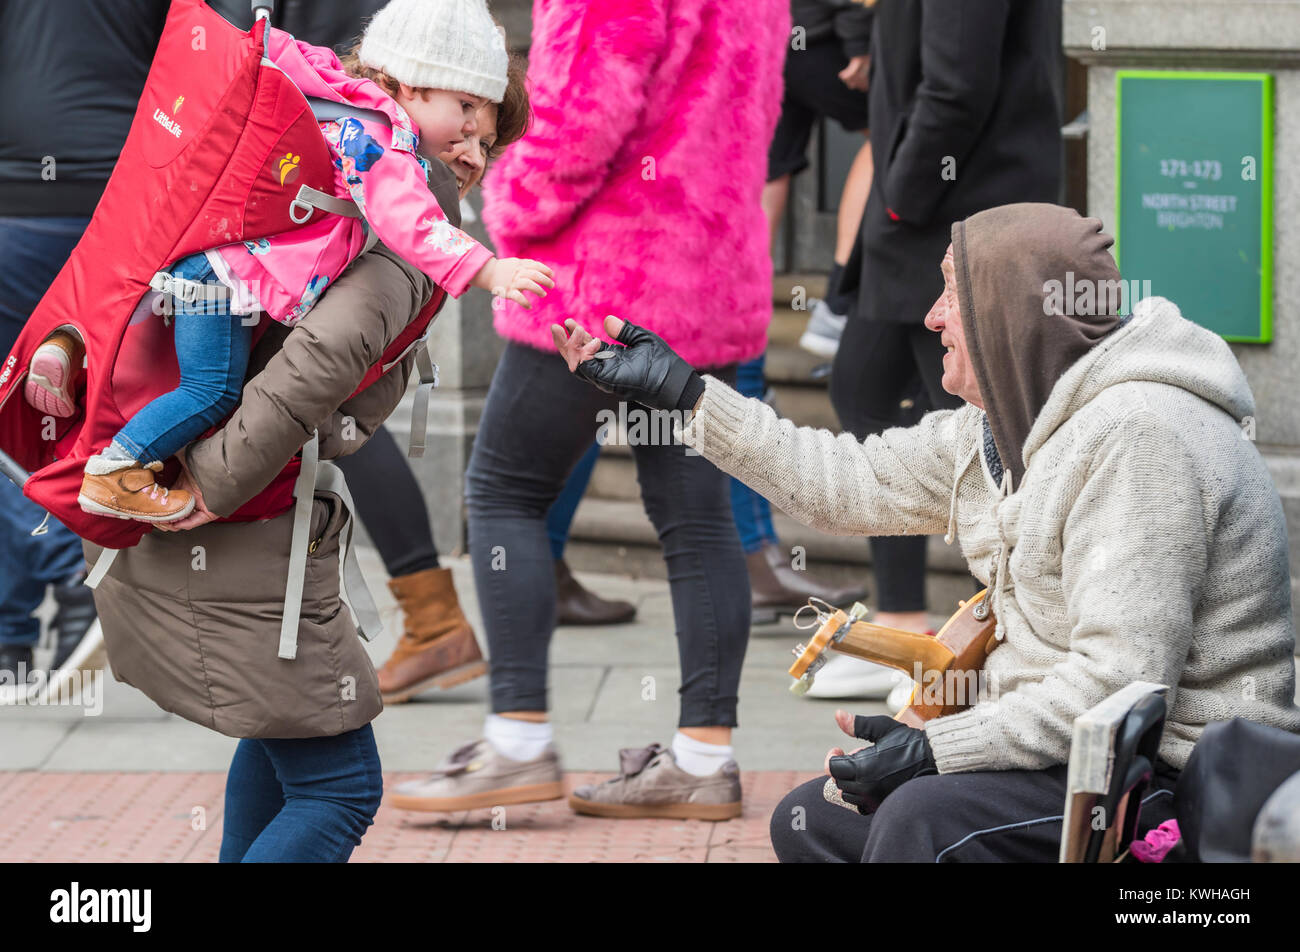 young-child-on-womans-shoulders-giving-money-to-a-street-busker-in-KWHAGH.jpg